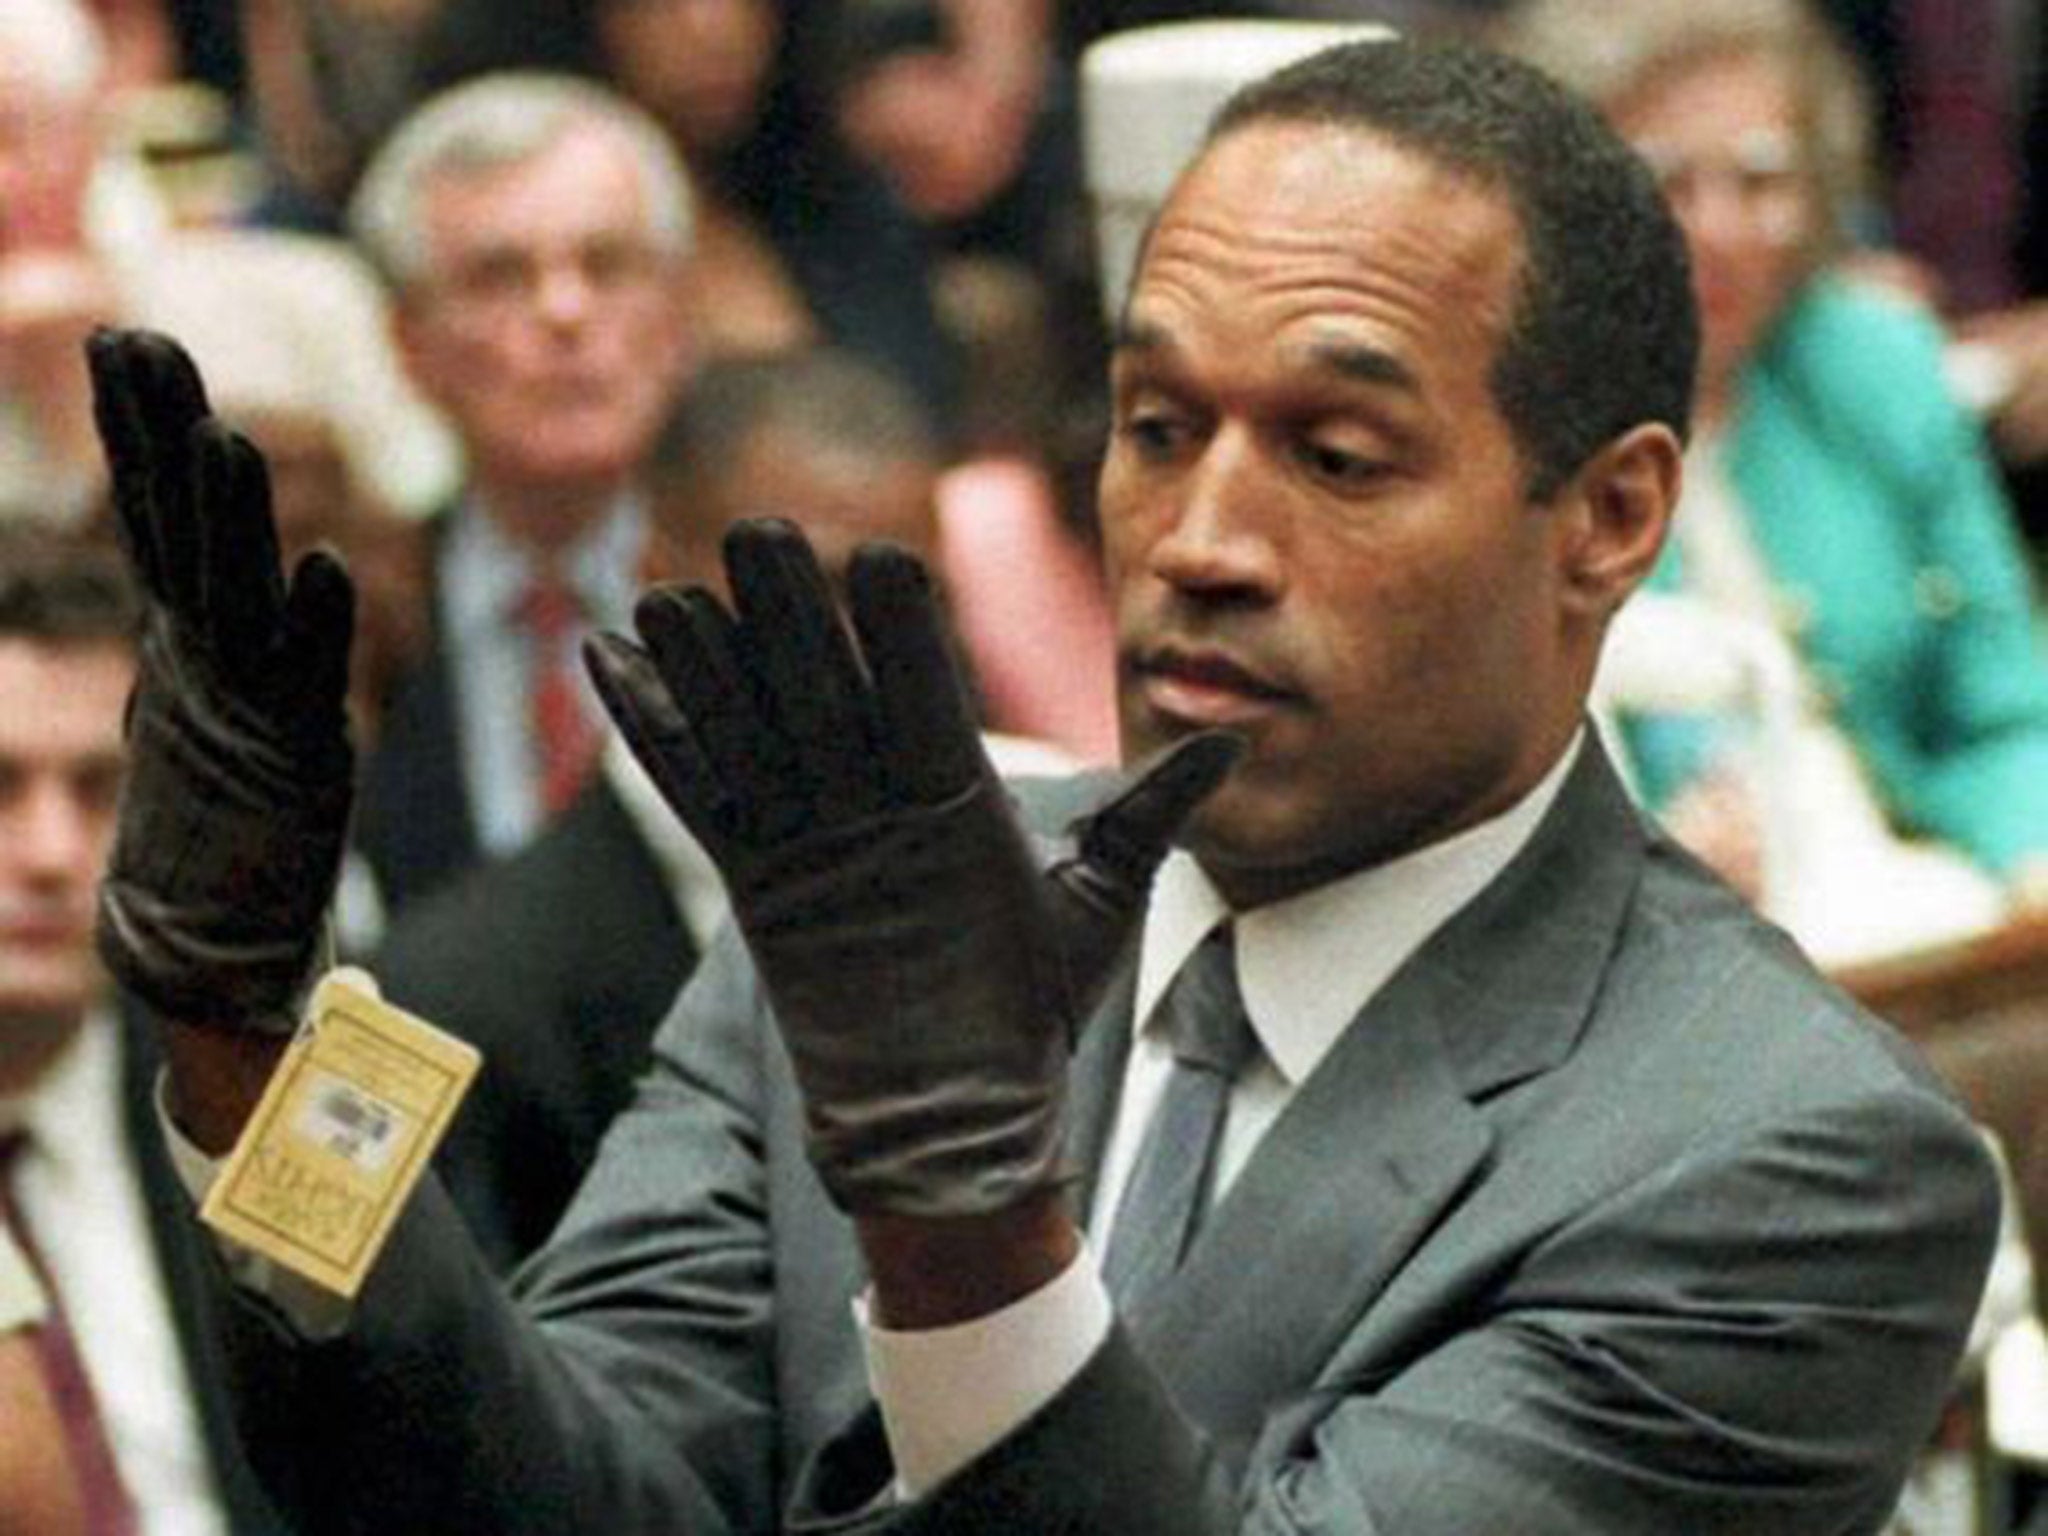 Fingered for the crime: O J Simpson tries on a glove presented as evidence in his trial